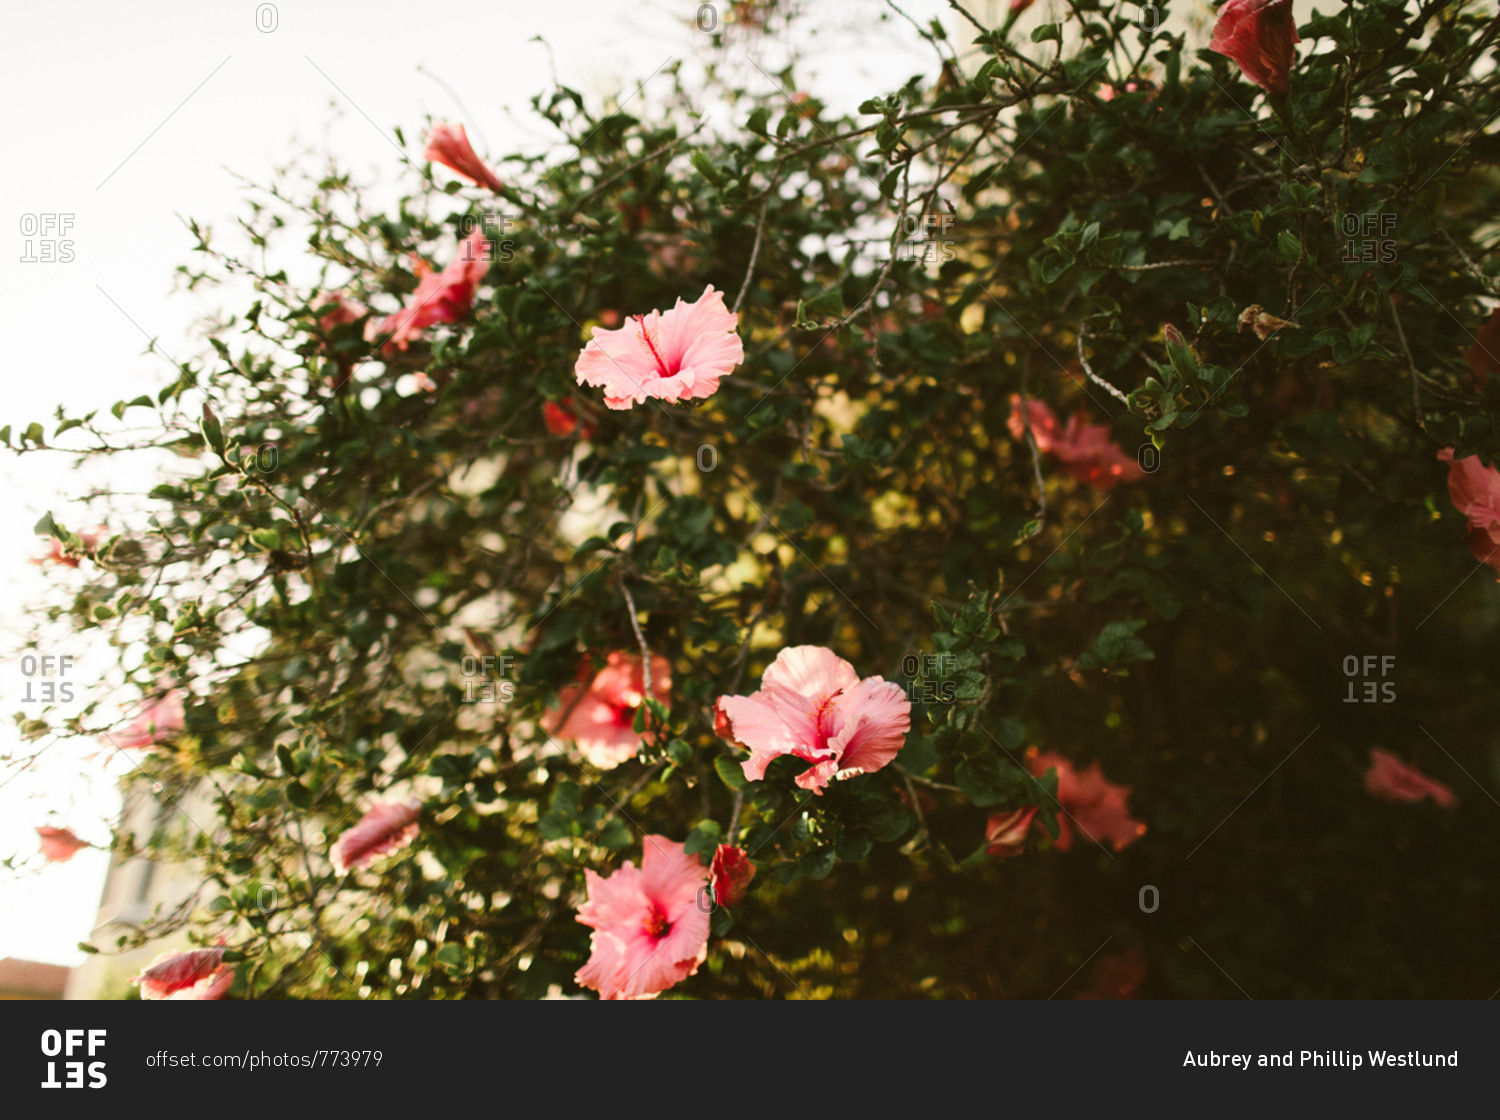 Hibiscus flower bush with bright pink flowers